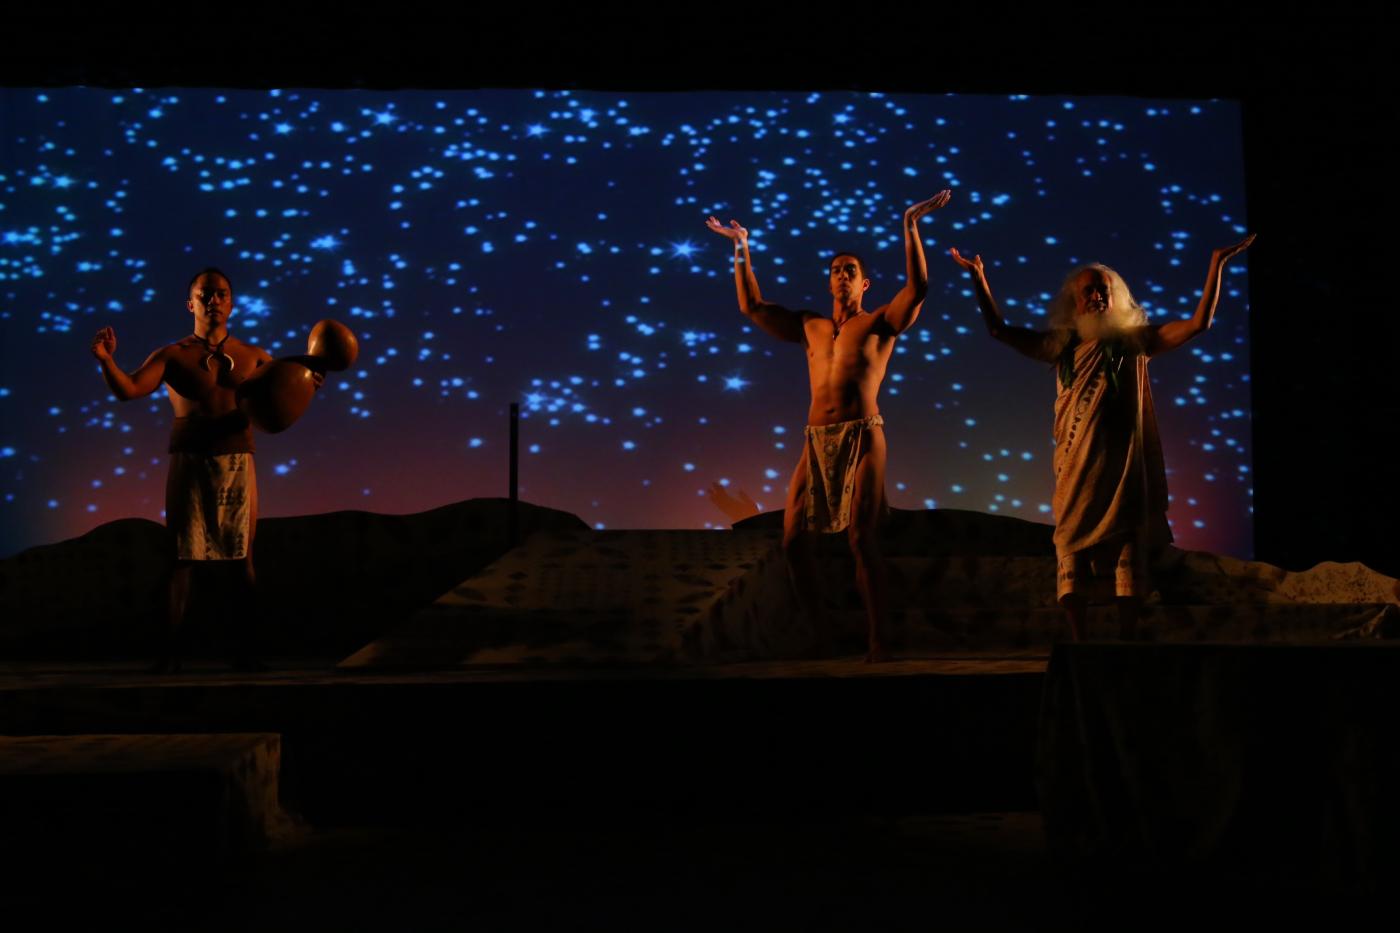 In front of a starry night backdrop, three men of different ages pose with their arms held up towards the sky.